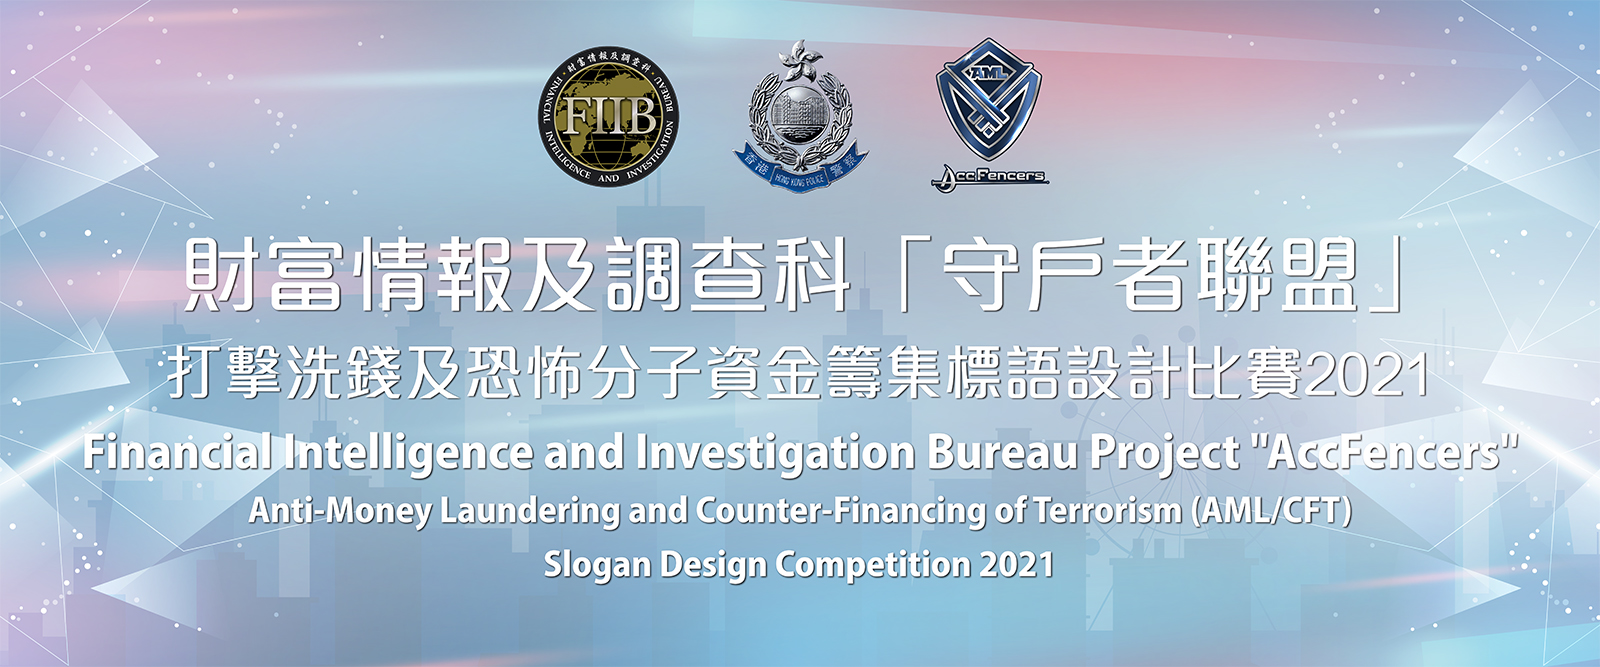 Financial Intelligence and Investigation Bureau Project “AccFencers” Anti-Money Laundering and Counter-Financing of Terrorism (AML / CFT) Slogan Design Competition